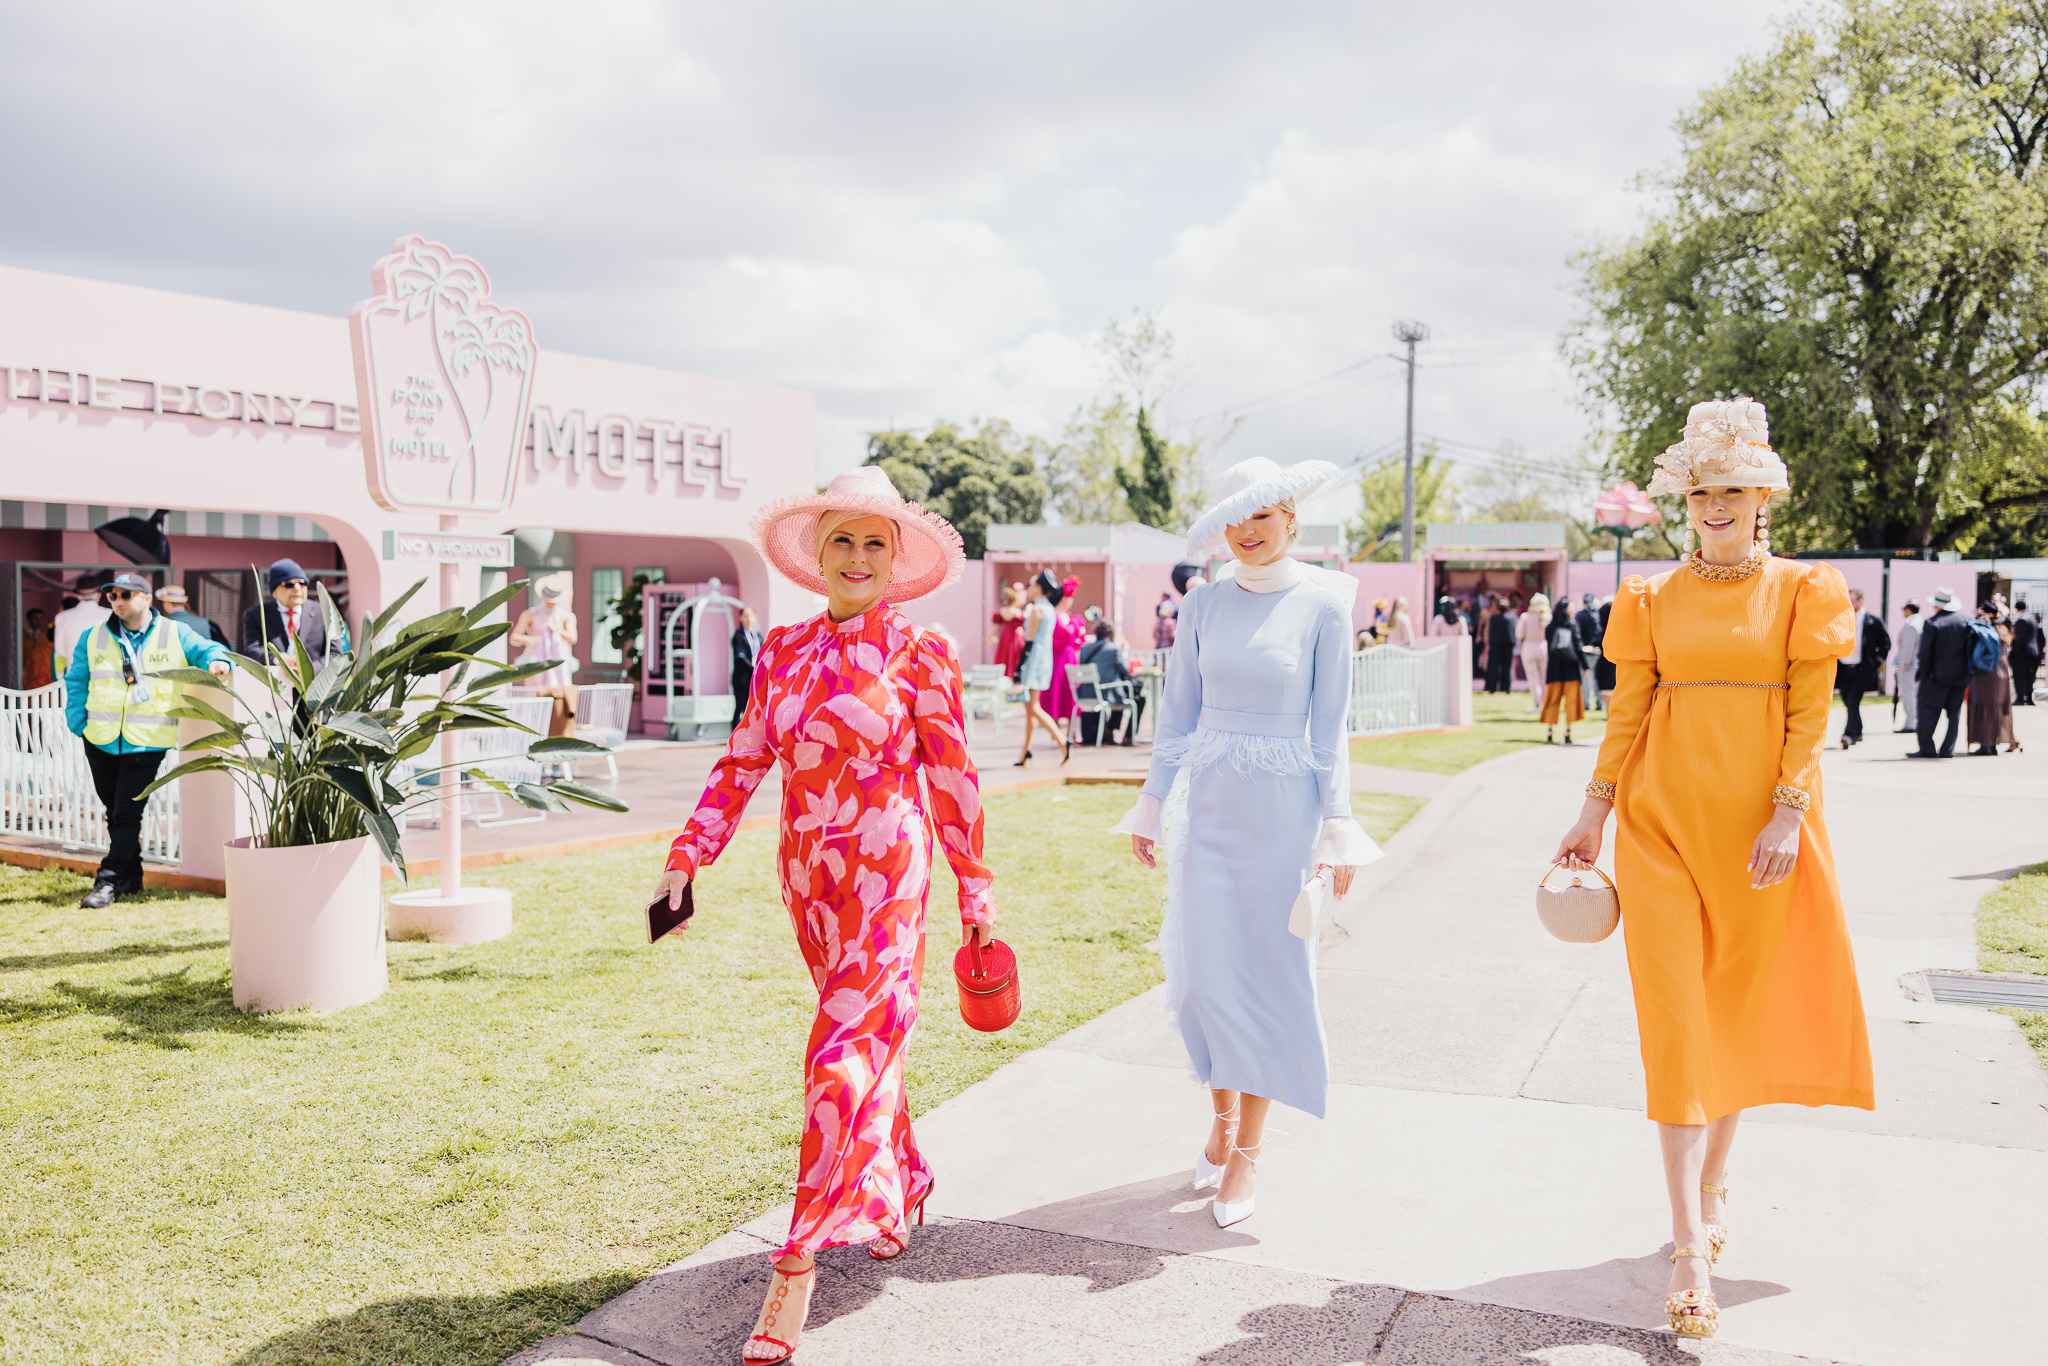 Fashion at Melbourne Cup